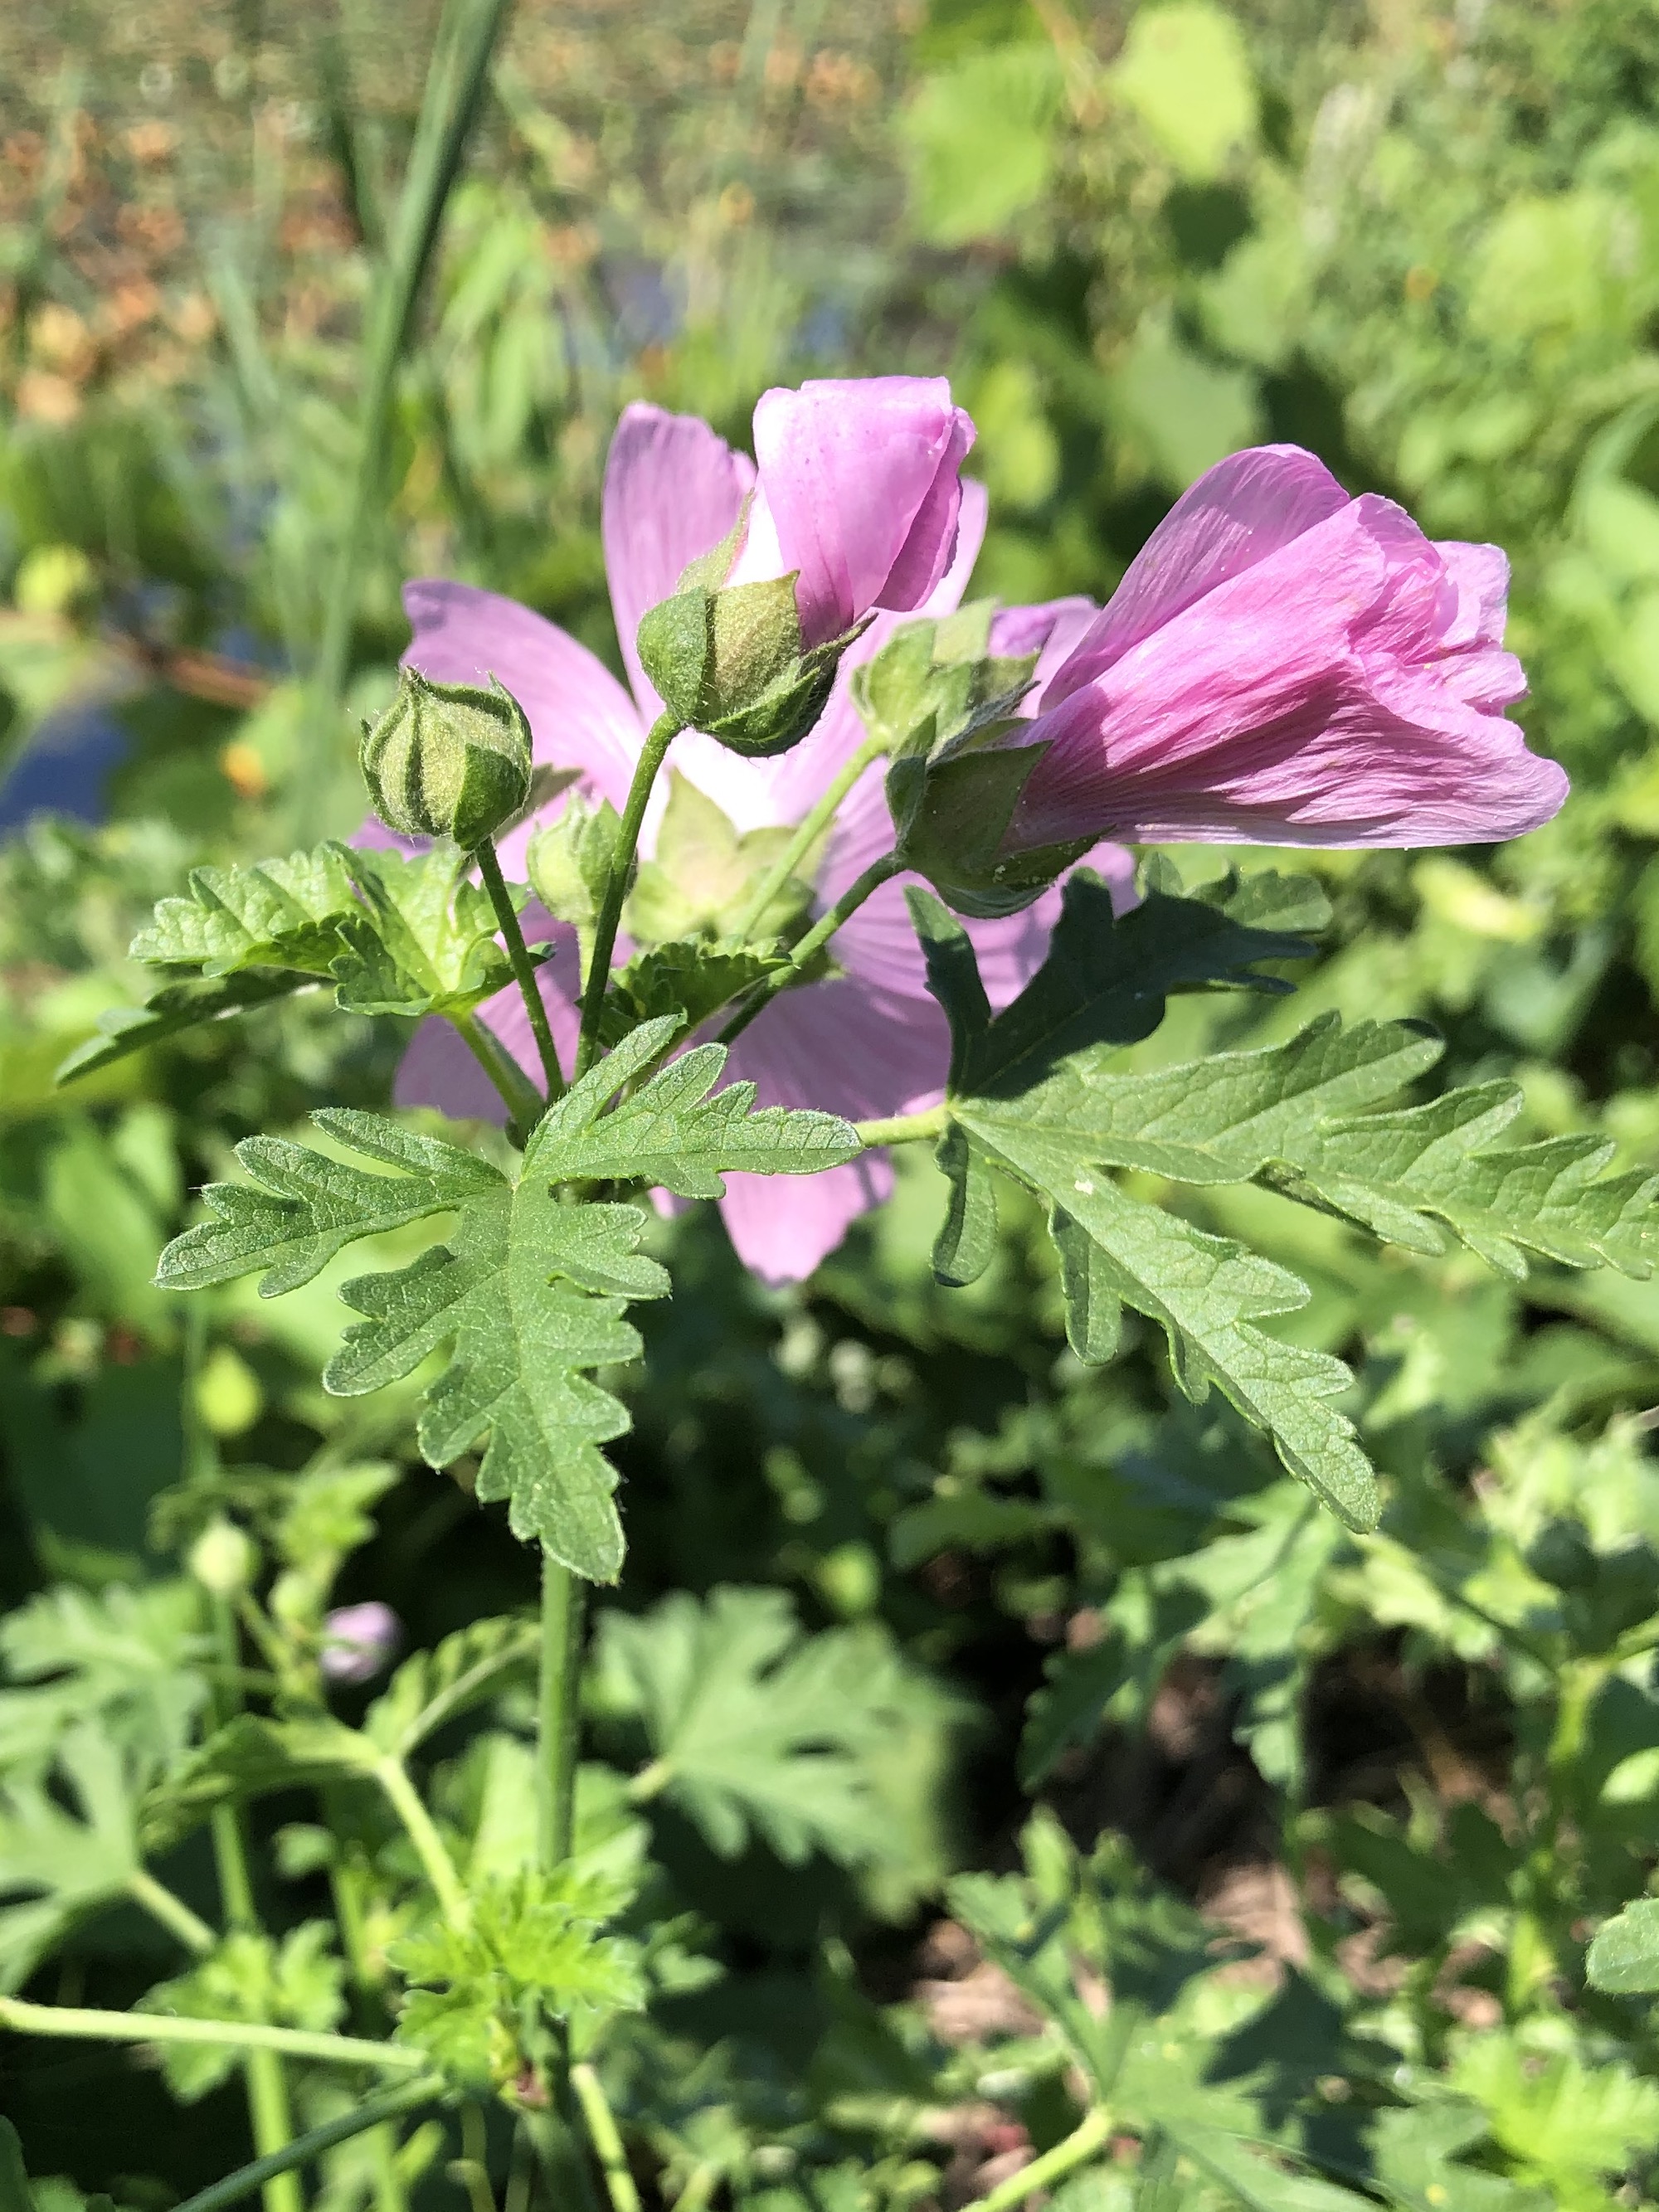 Vervain Mallow on the shore of Lake Wingra in Vilas Park in Madison, Wisconsin on September 5, 2021.